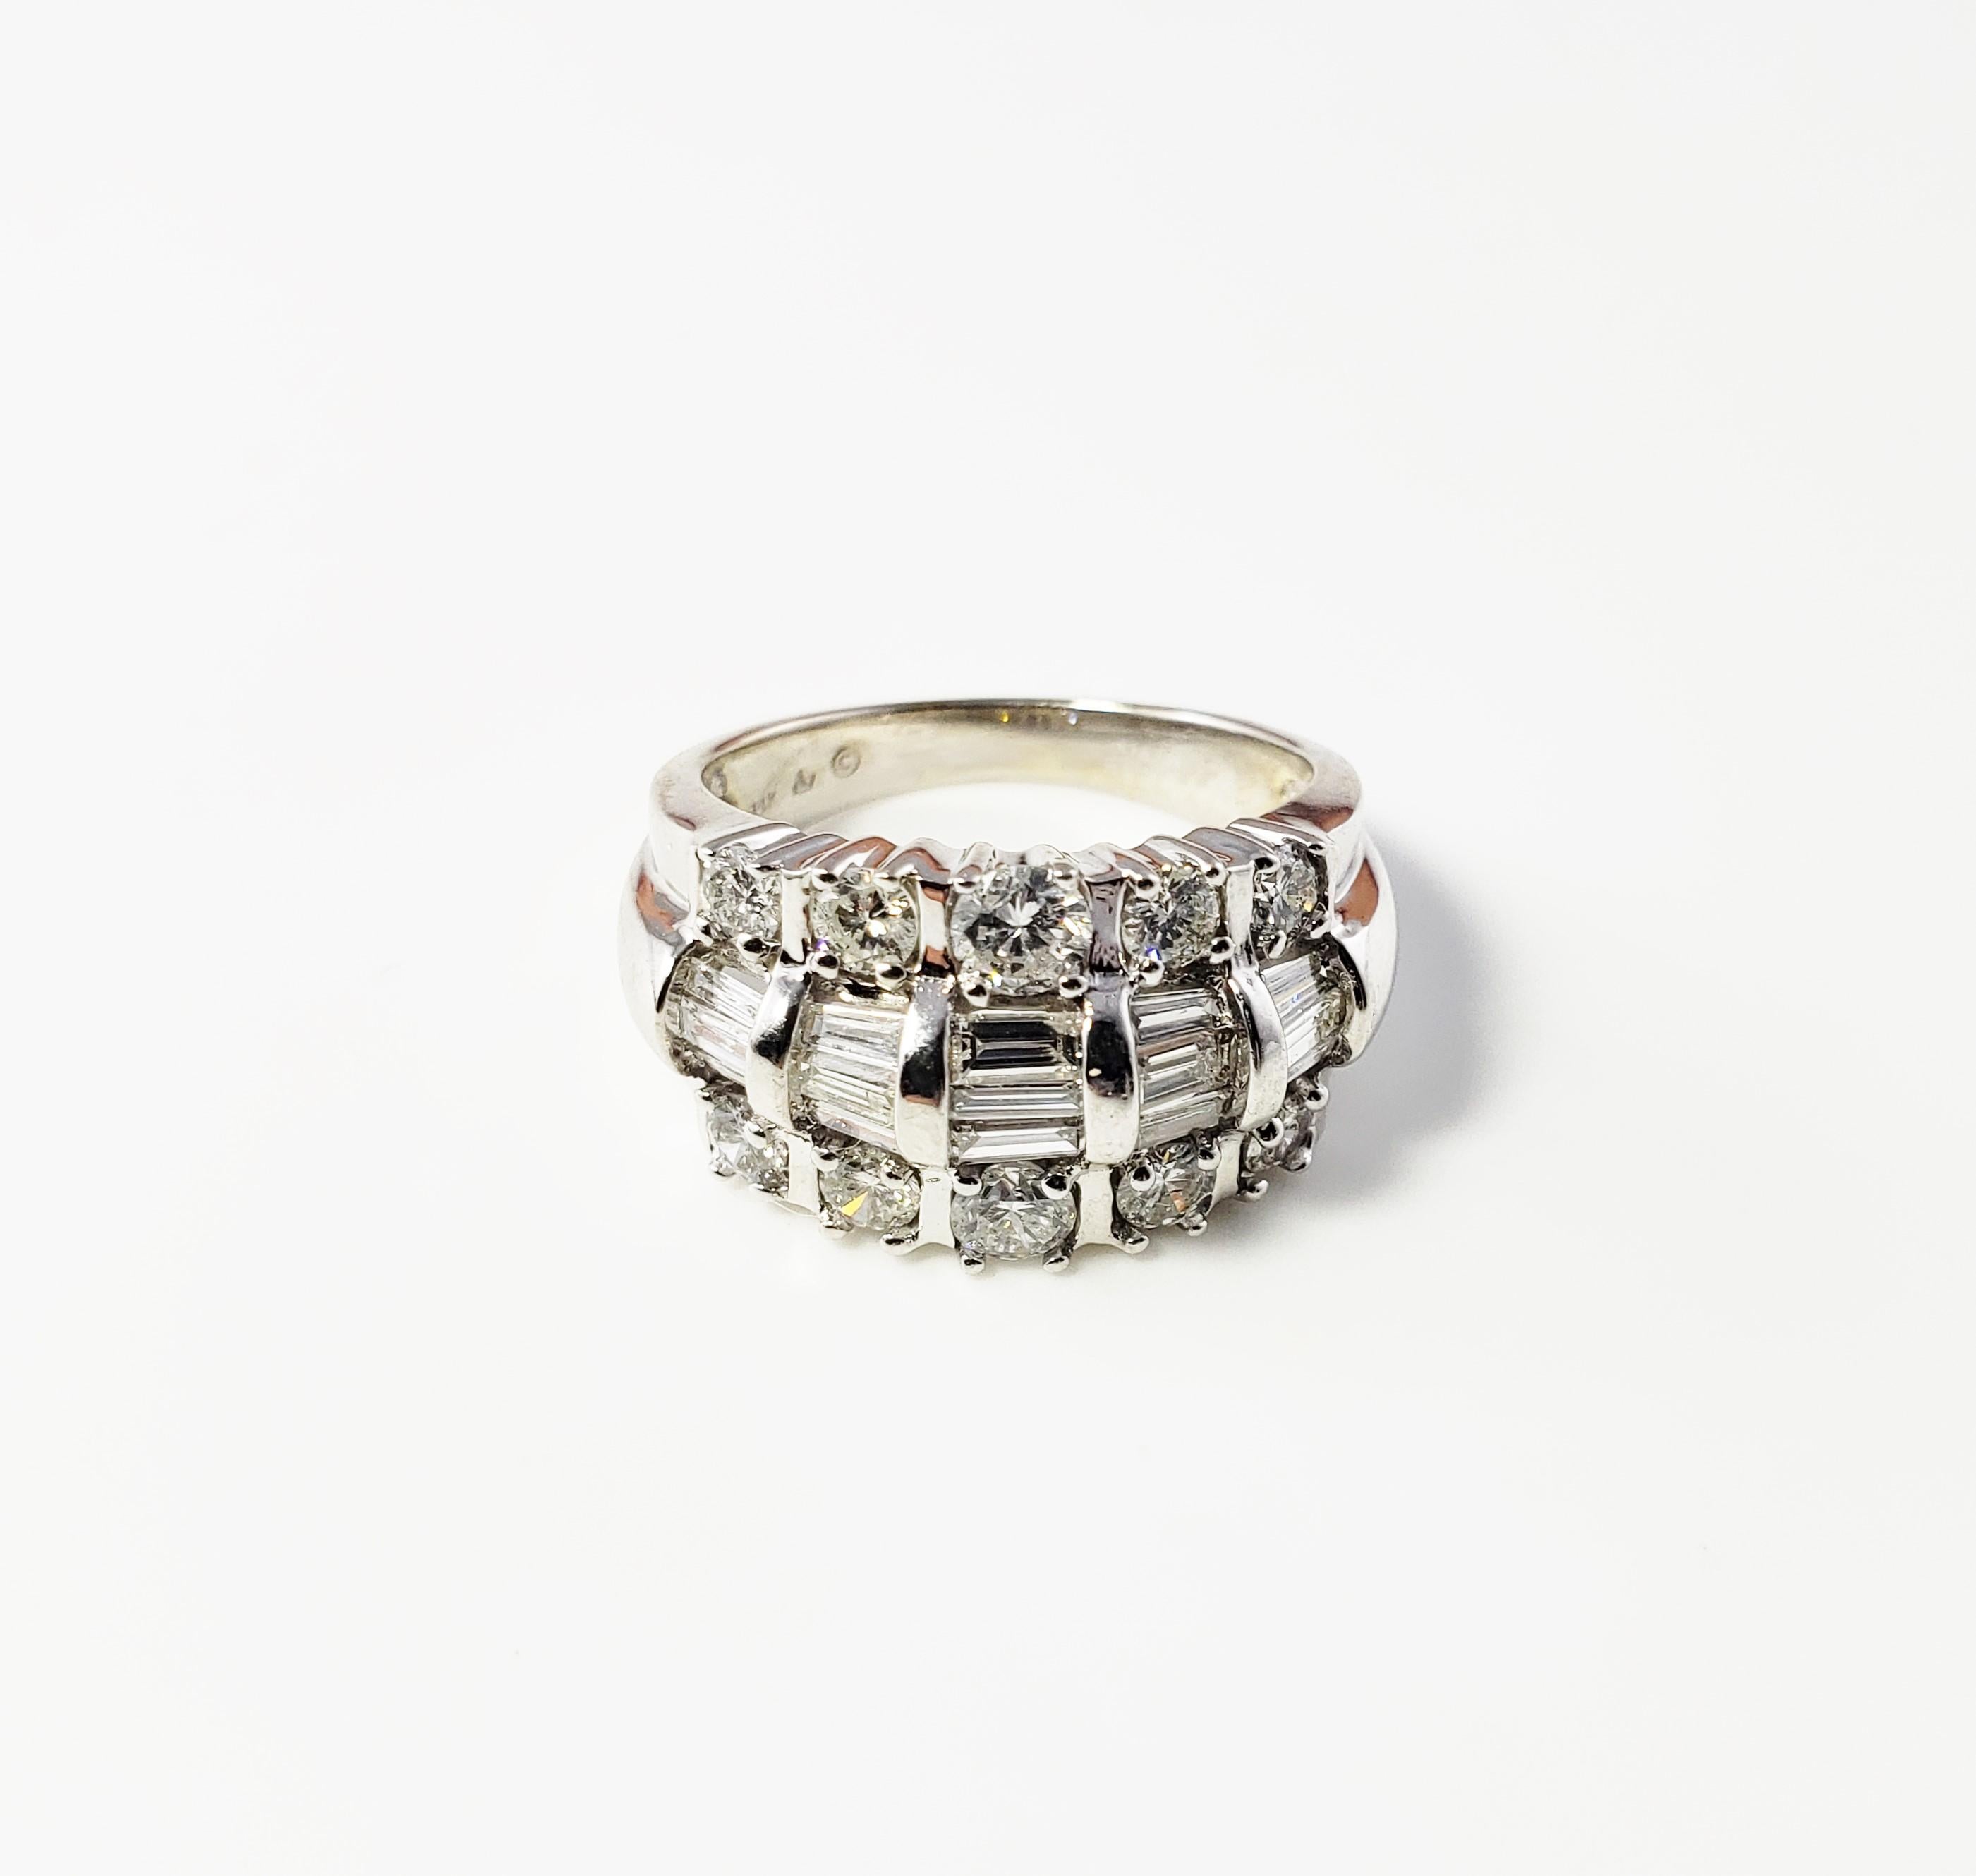 Vintage 14 Karat White Gold and Diamond Band Size 7-

This spectacular ring features 15 baguette diamonds (.45 ct. twt.) and ten round brilliant cut diamonds (.82 ct. twt.) set in beautifully detailed 14K white gold. Width: 12 mm. Shank: 3